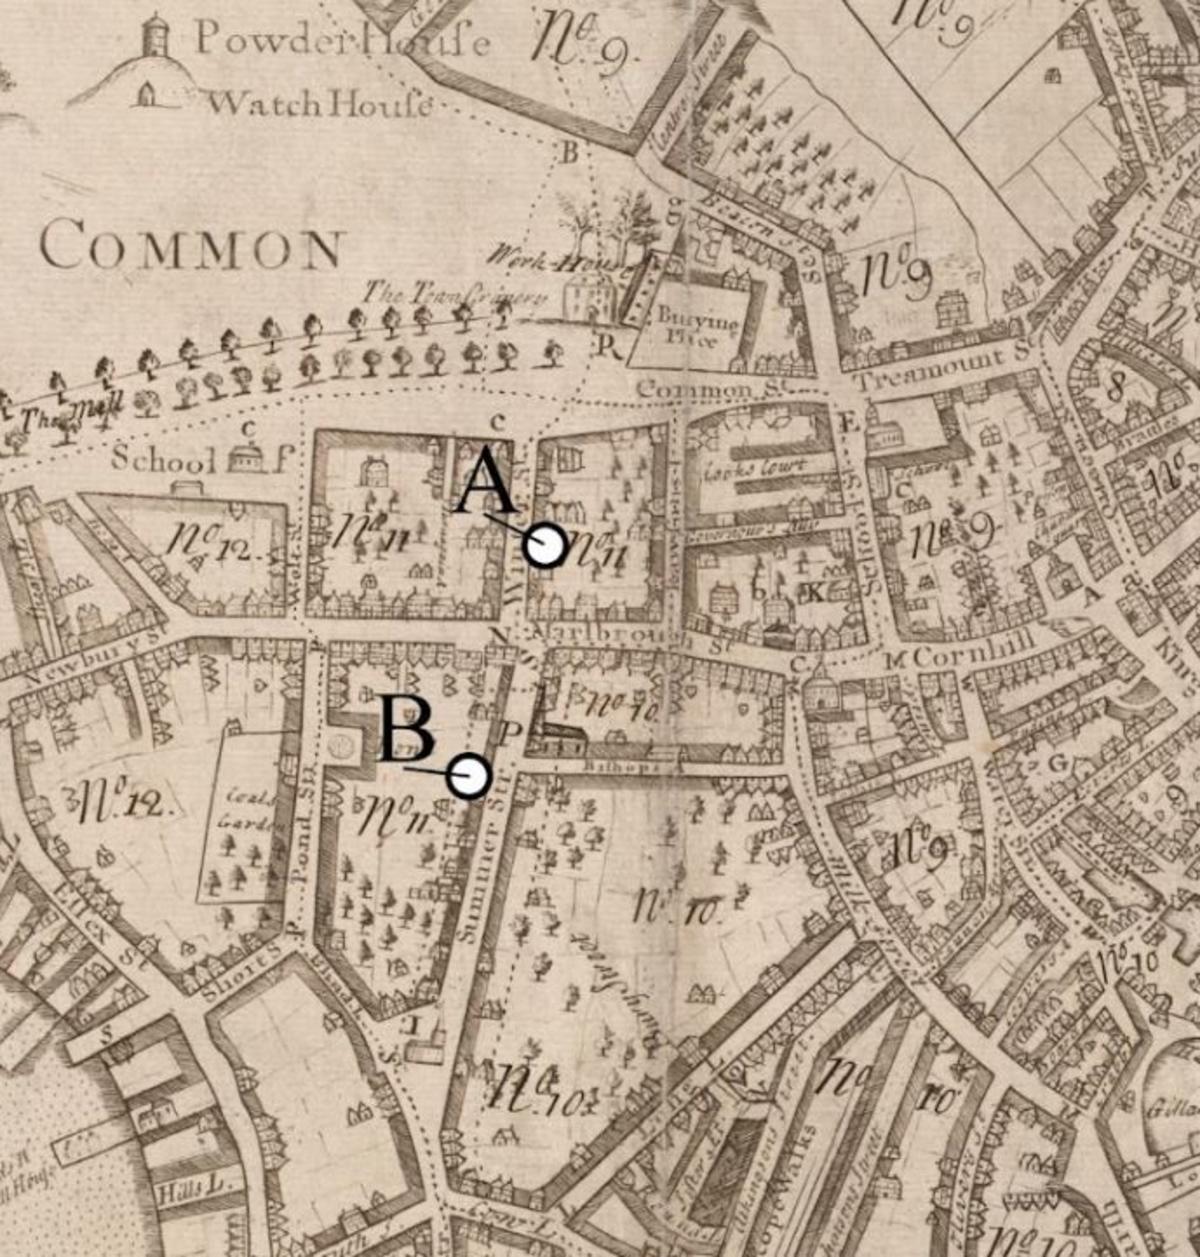 A view of the 1722 Bonner map of Boston showing the locations of Jane's and Sebastian's homes, one on Winter Street and one on Summer Street.